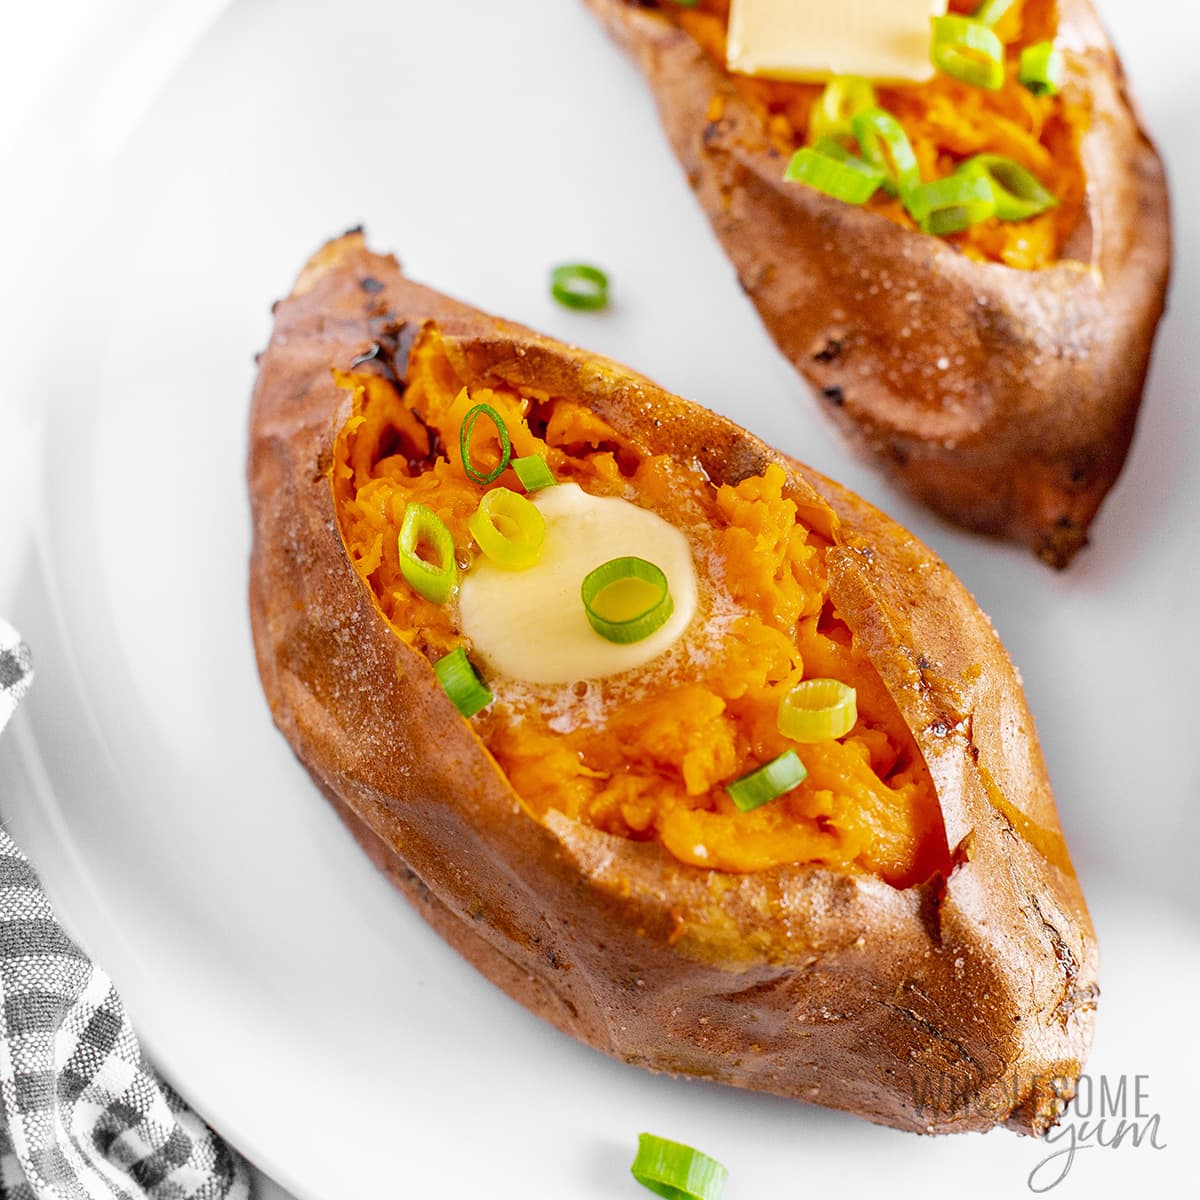 Toppings added to a baked sweet potato.